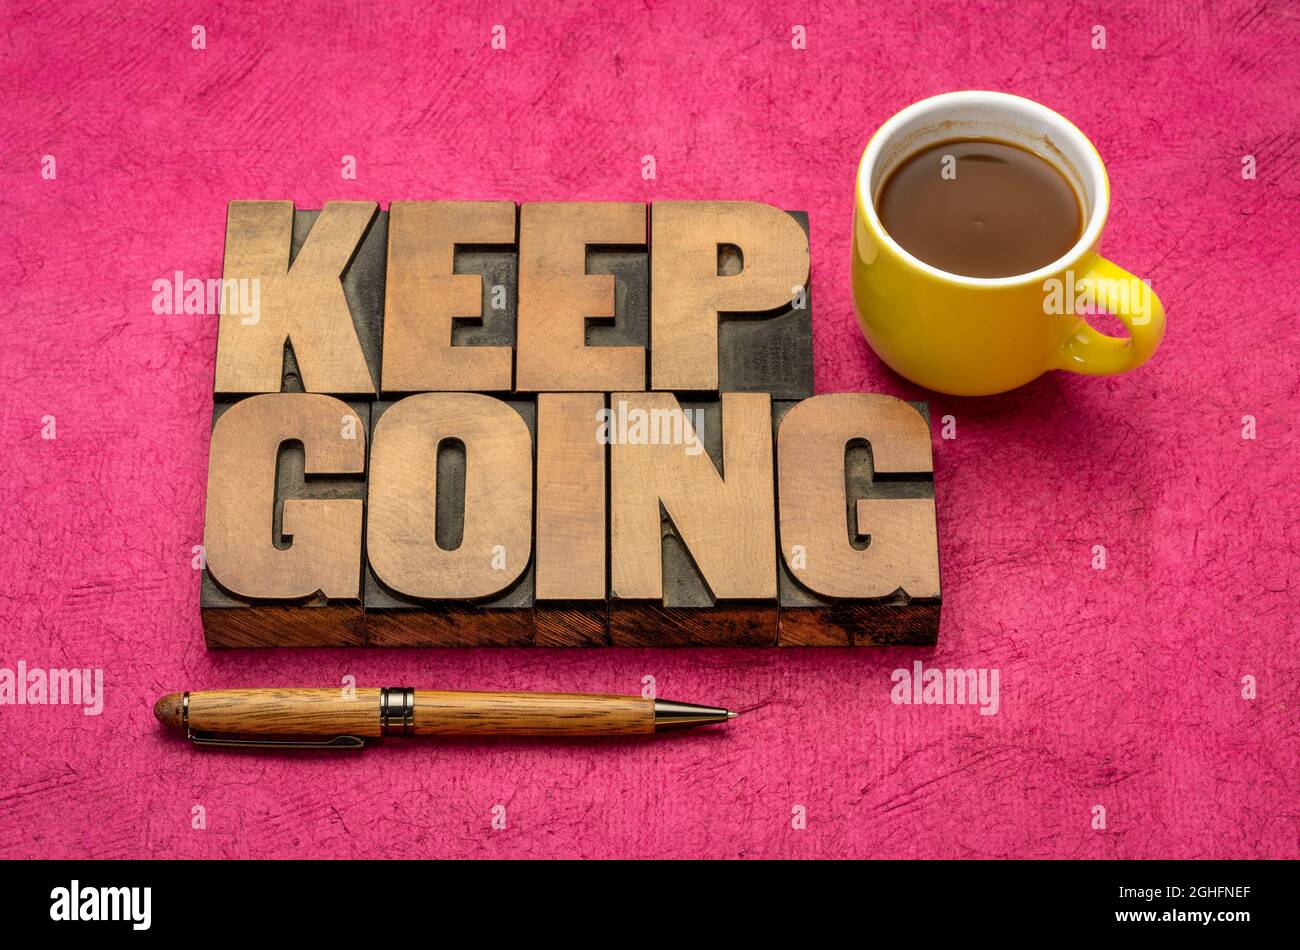 Keep going motivation word abstract in vintage letterpress wood type blocks with a cup of coffee, determination, persistence and tenacity concept Stock Photo